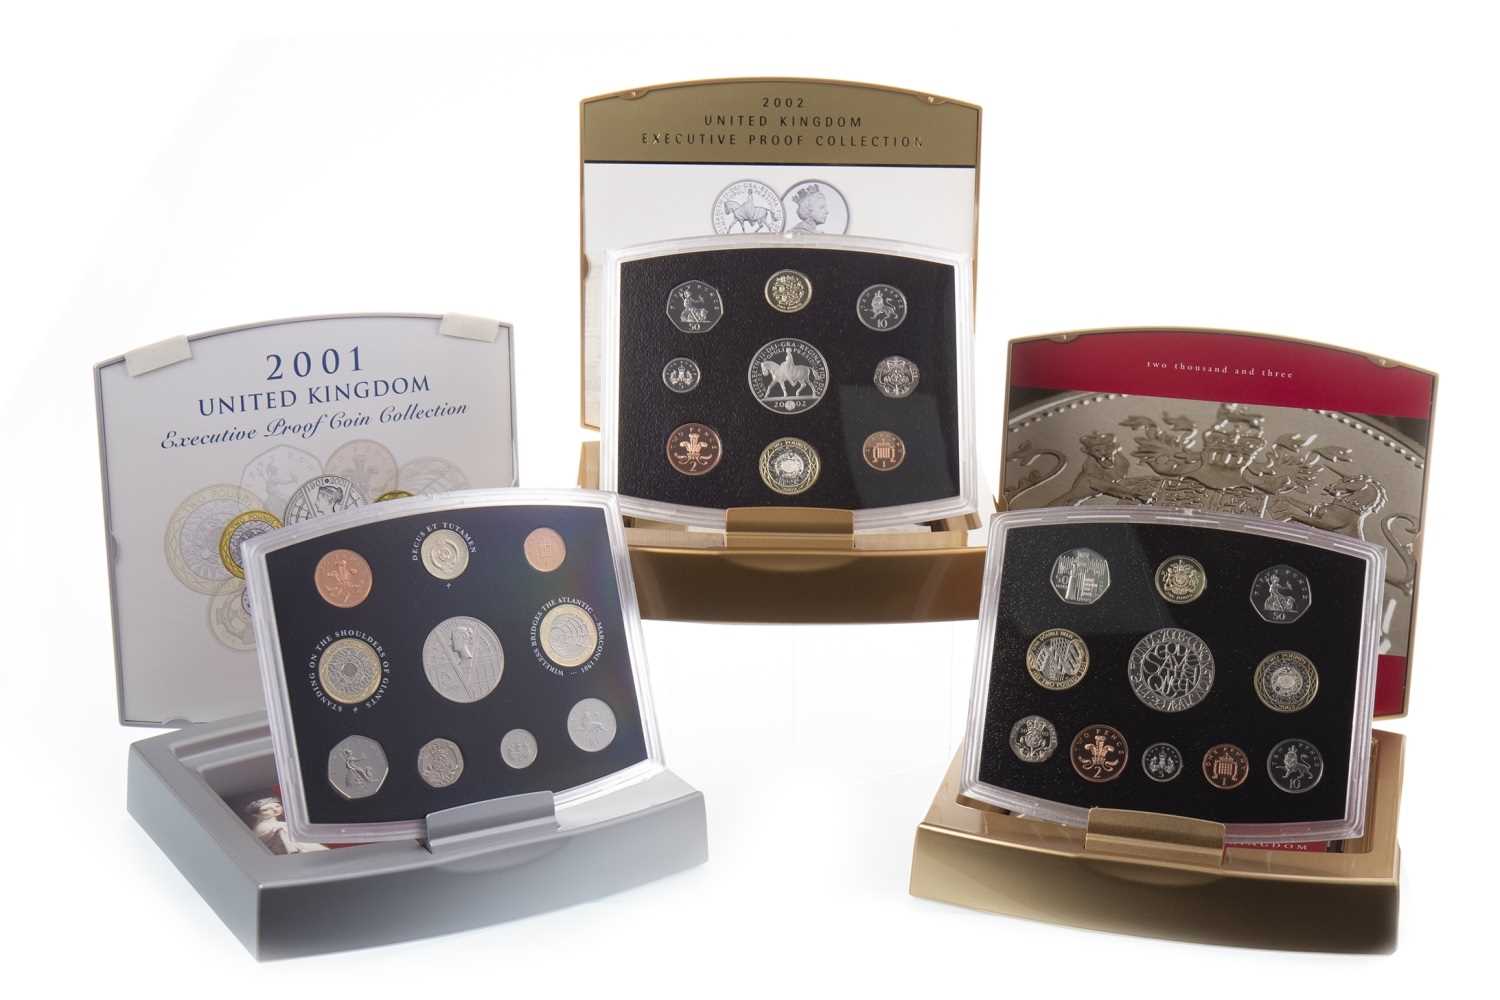 Lot 586 - THREE UNITED KINGDOM EXECUTIVE COIN COLLECTIONS